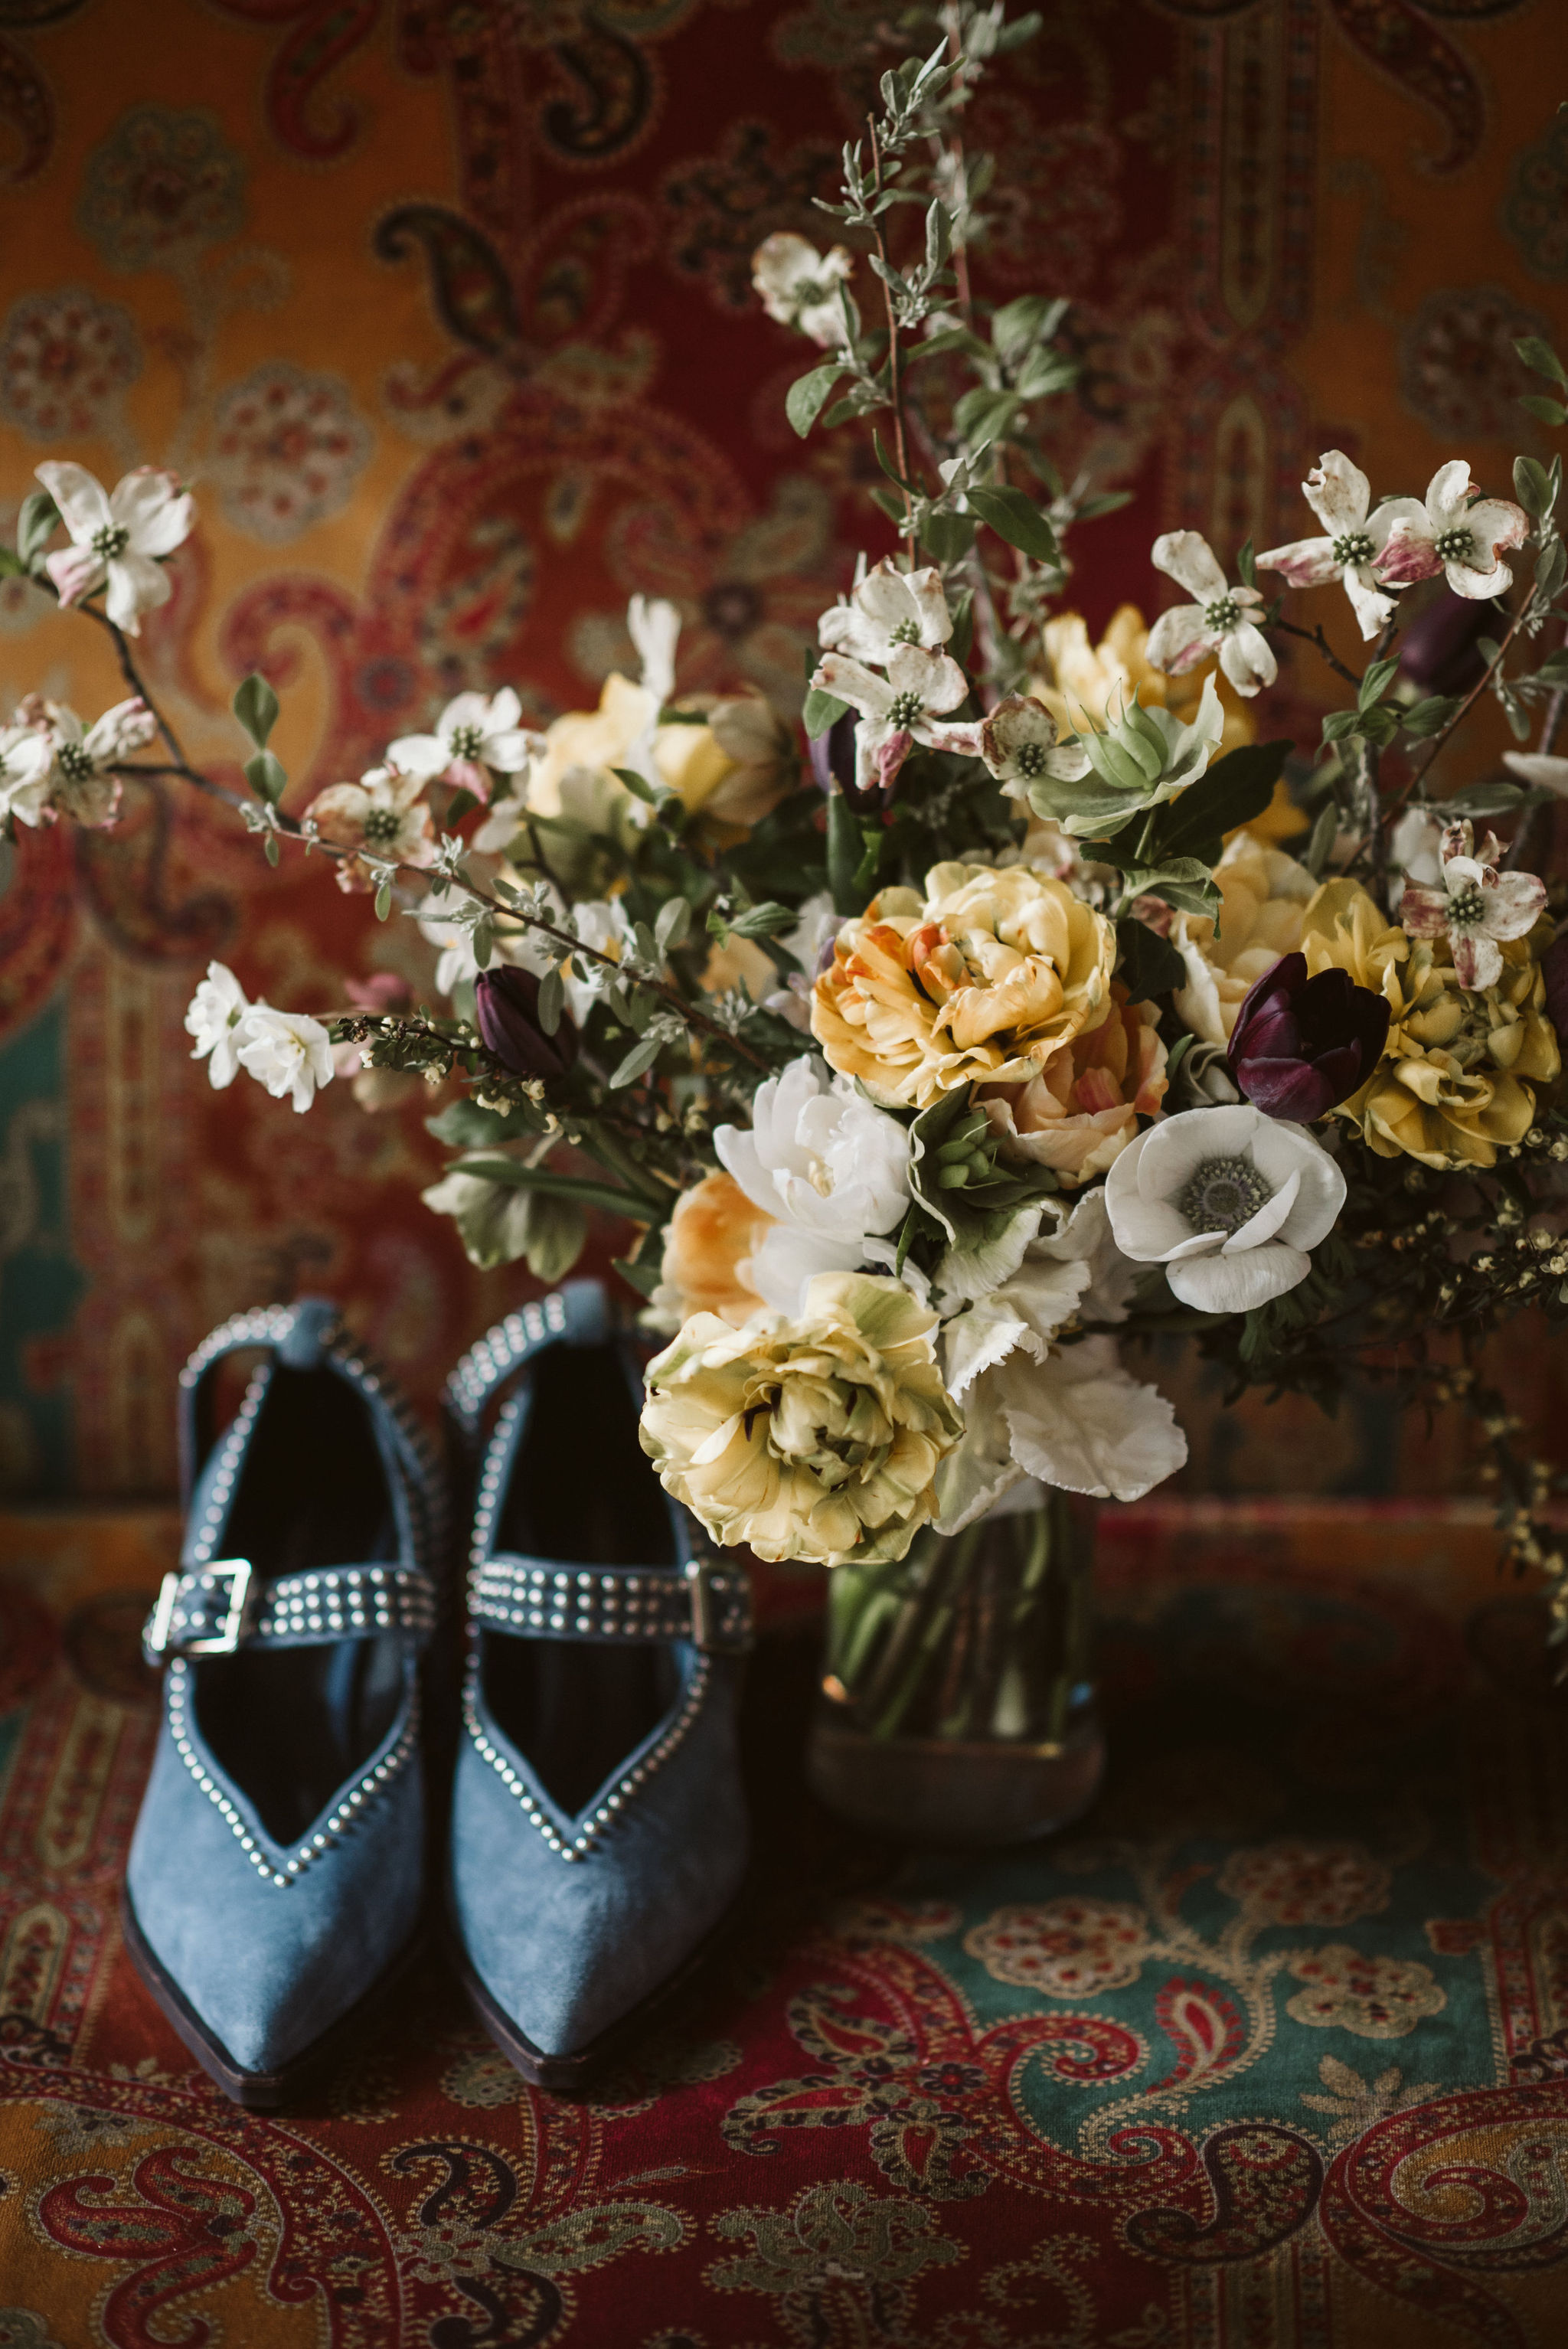  Washington DC, Baltimore Wedding Photographer, Alexandria, Old Town, Jewel Tone, Romantic, Modern, The Alexandrian Autograph Collection Hotel, Sungold Flower Co, Floral arrangement next to blue studded suede heels 